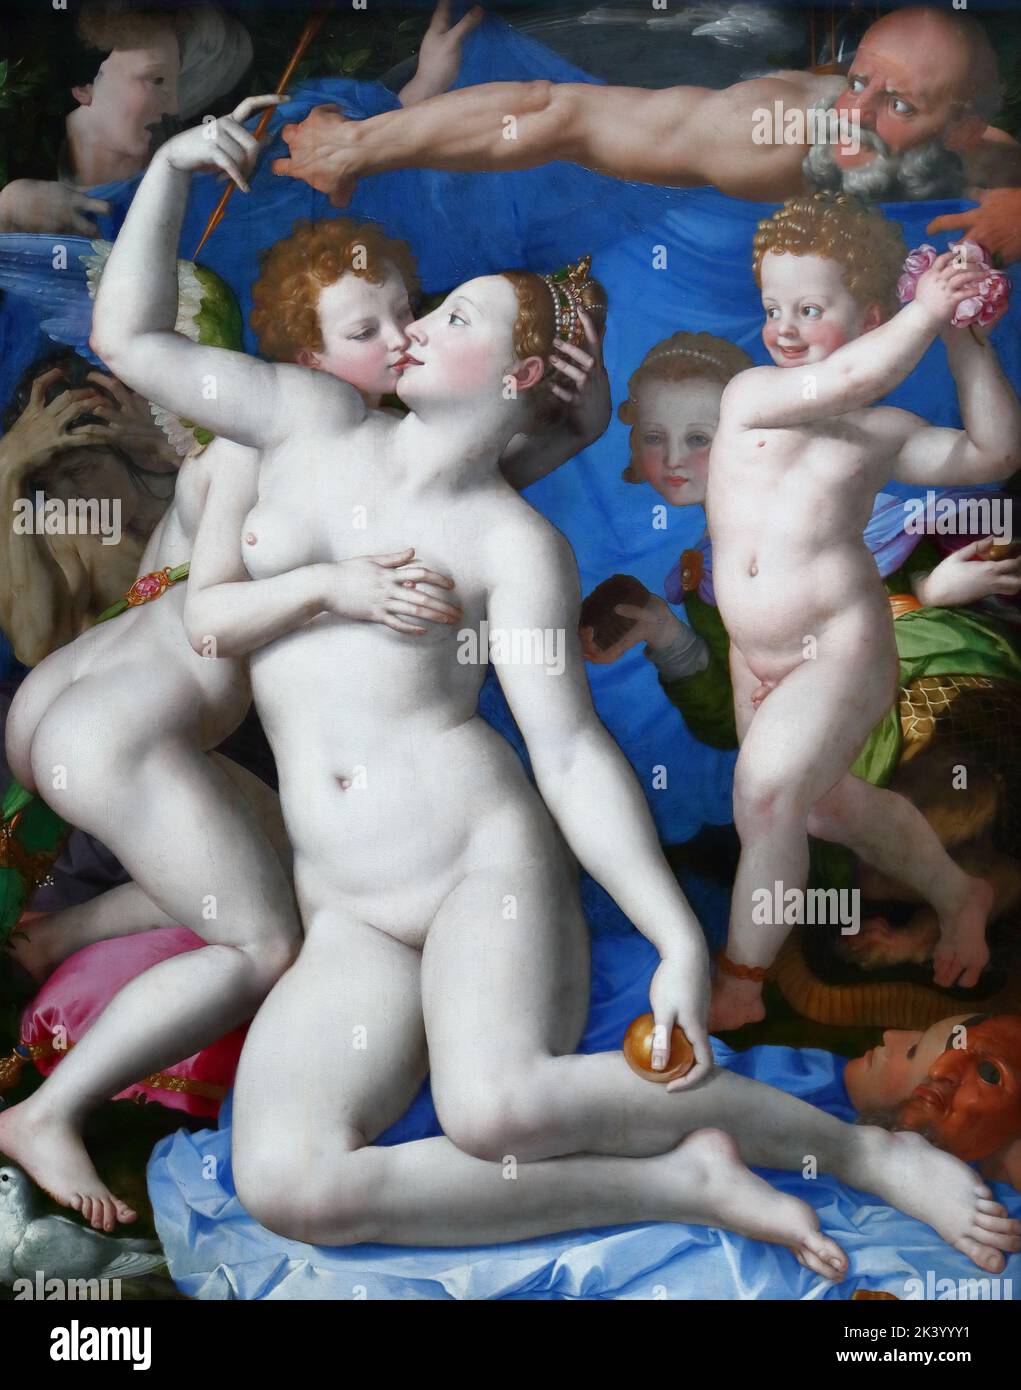 An Allegory with Venus and Cupid by Italian mannerist painter Agnolo Bronzino at the National Gallery, London, UK Stock Photo